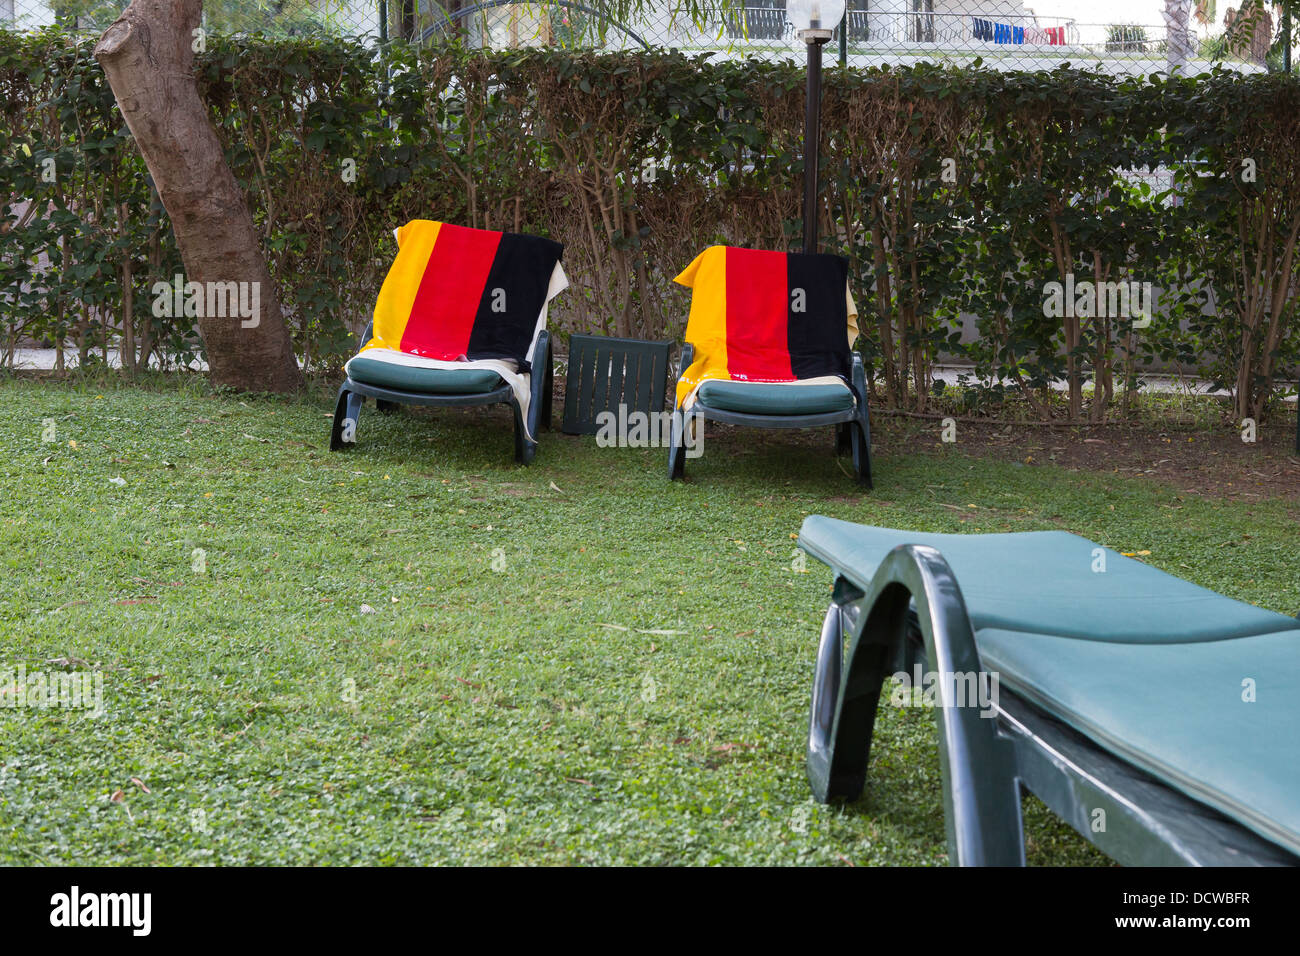 Towels in the colours of the German flag are used to reserve sun loungers at a hotel Stock Photo